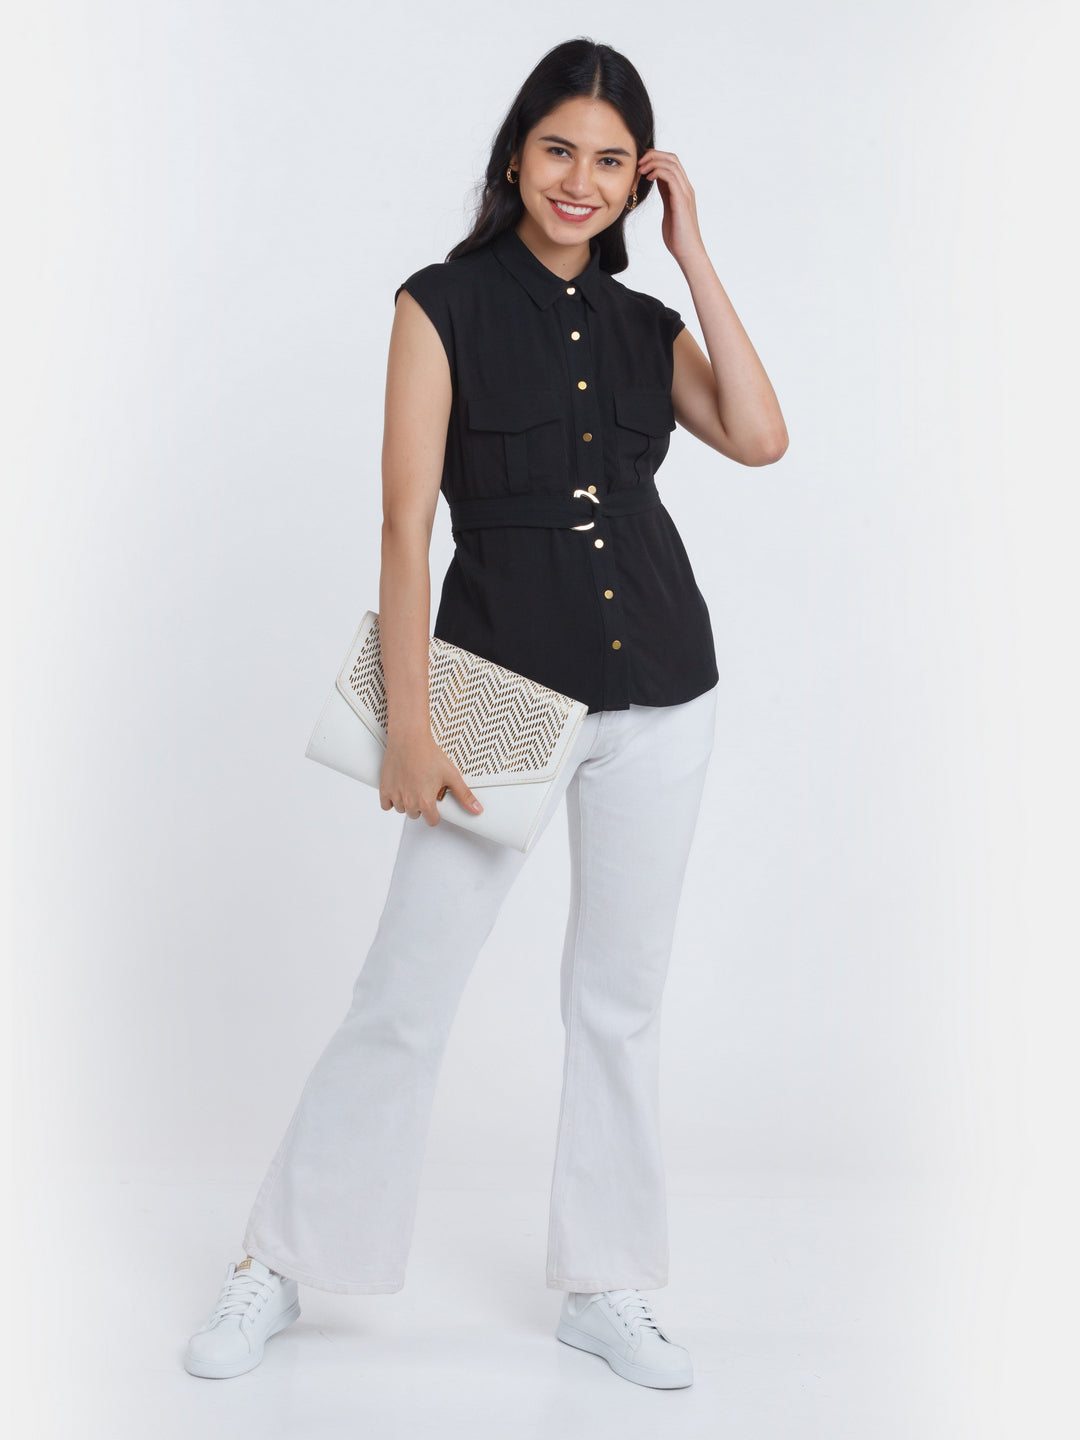 Black Solid Utility Top For Women